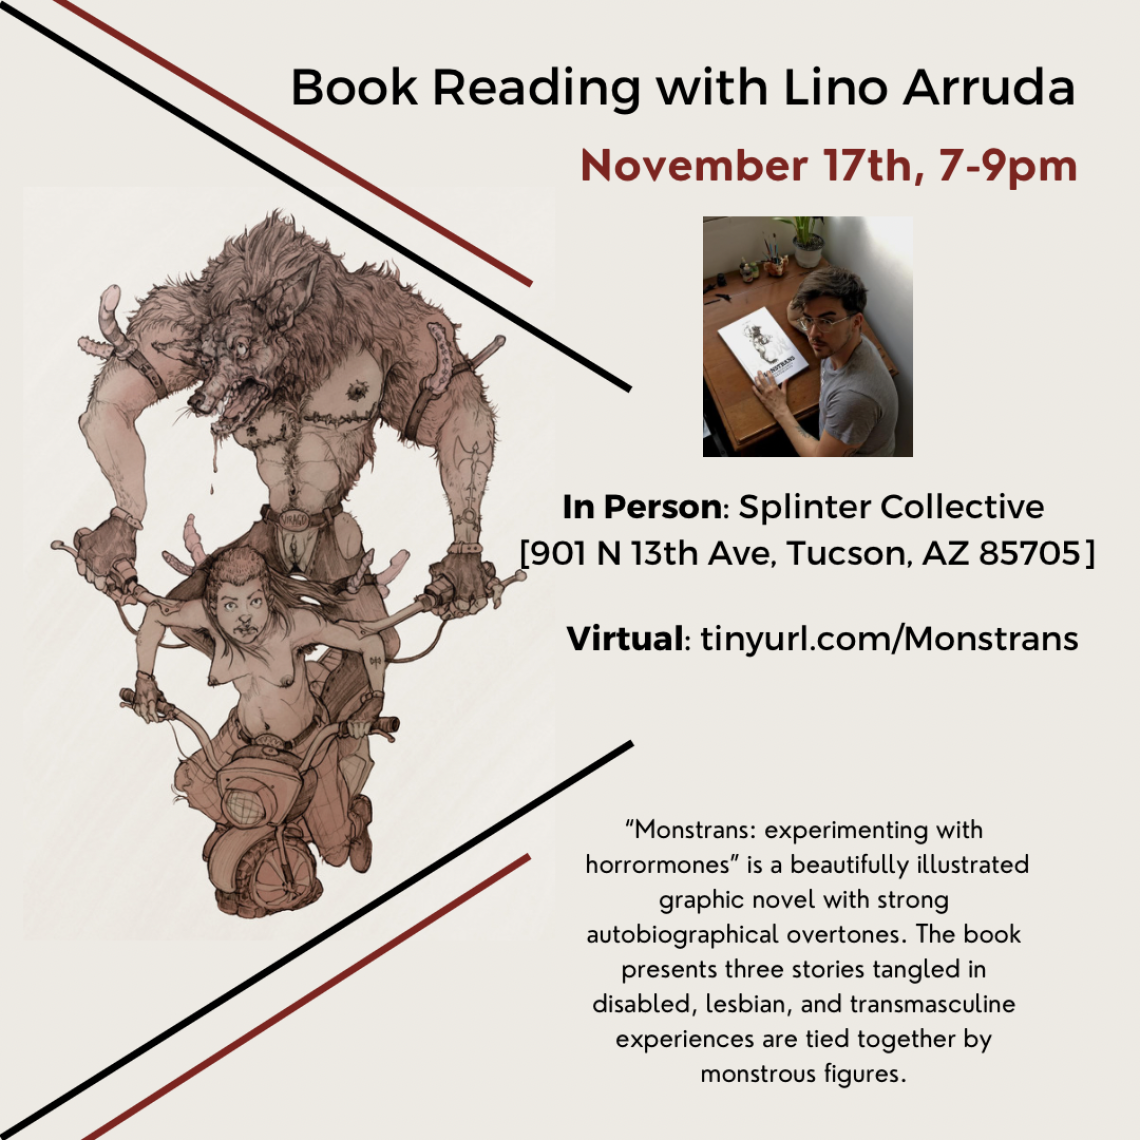 Tan flyer with black and red strips surrounding a cartoon monster behind a person. Text reads: Book reading with Lino Arruda. November 17th, 7-9pm. In-person: Splinter Collective [901 N 13th Ave, Tucson, AZ 85705] Virtual: tinyurl.com/Monstrans  “Monstrans: experimenting with horrormones” is a beautifully illustrated graphic novel with strong autobiographical overtones. The book presents three stories tangled in disabled, lesbian and transmasculine experiences that are tied together by monstrous figures.